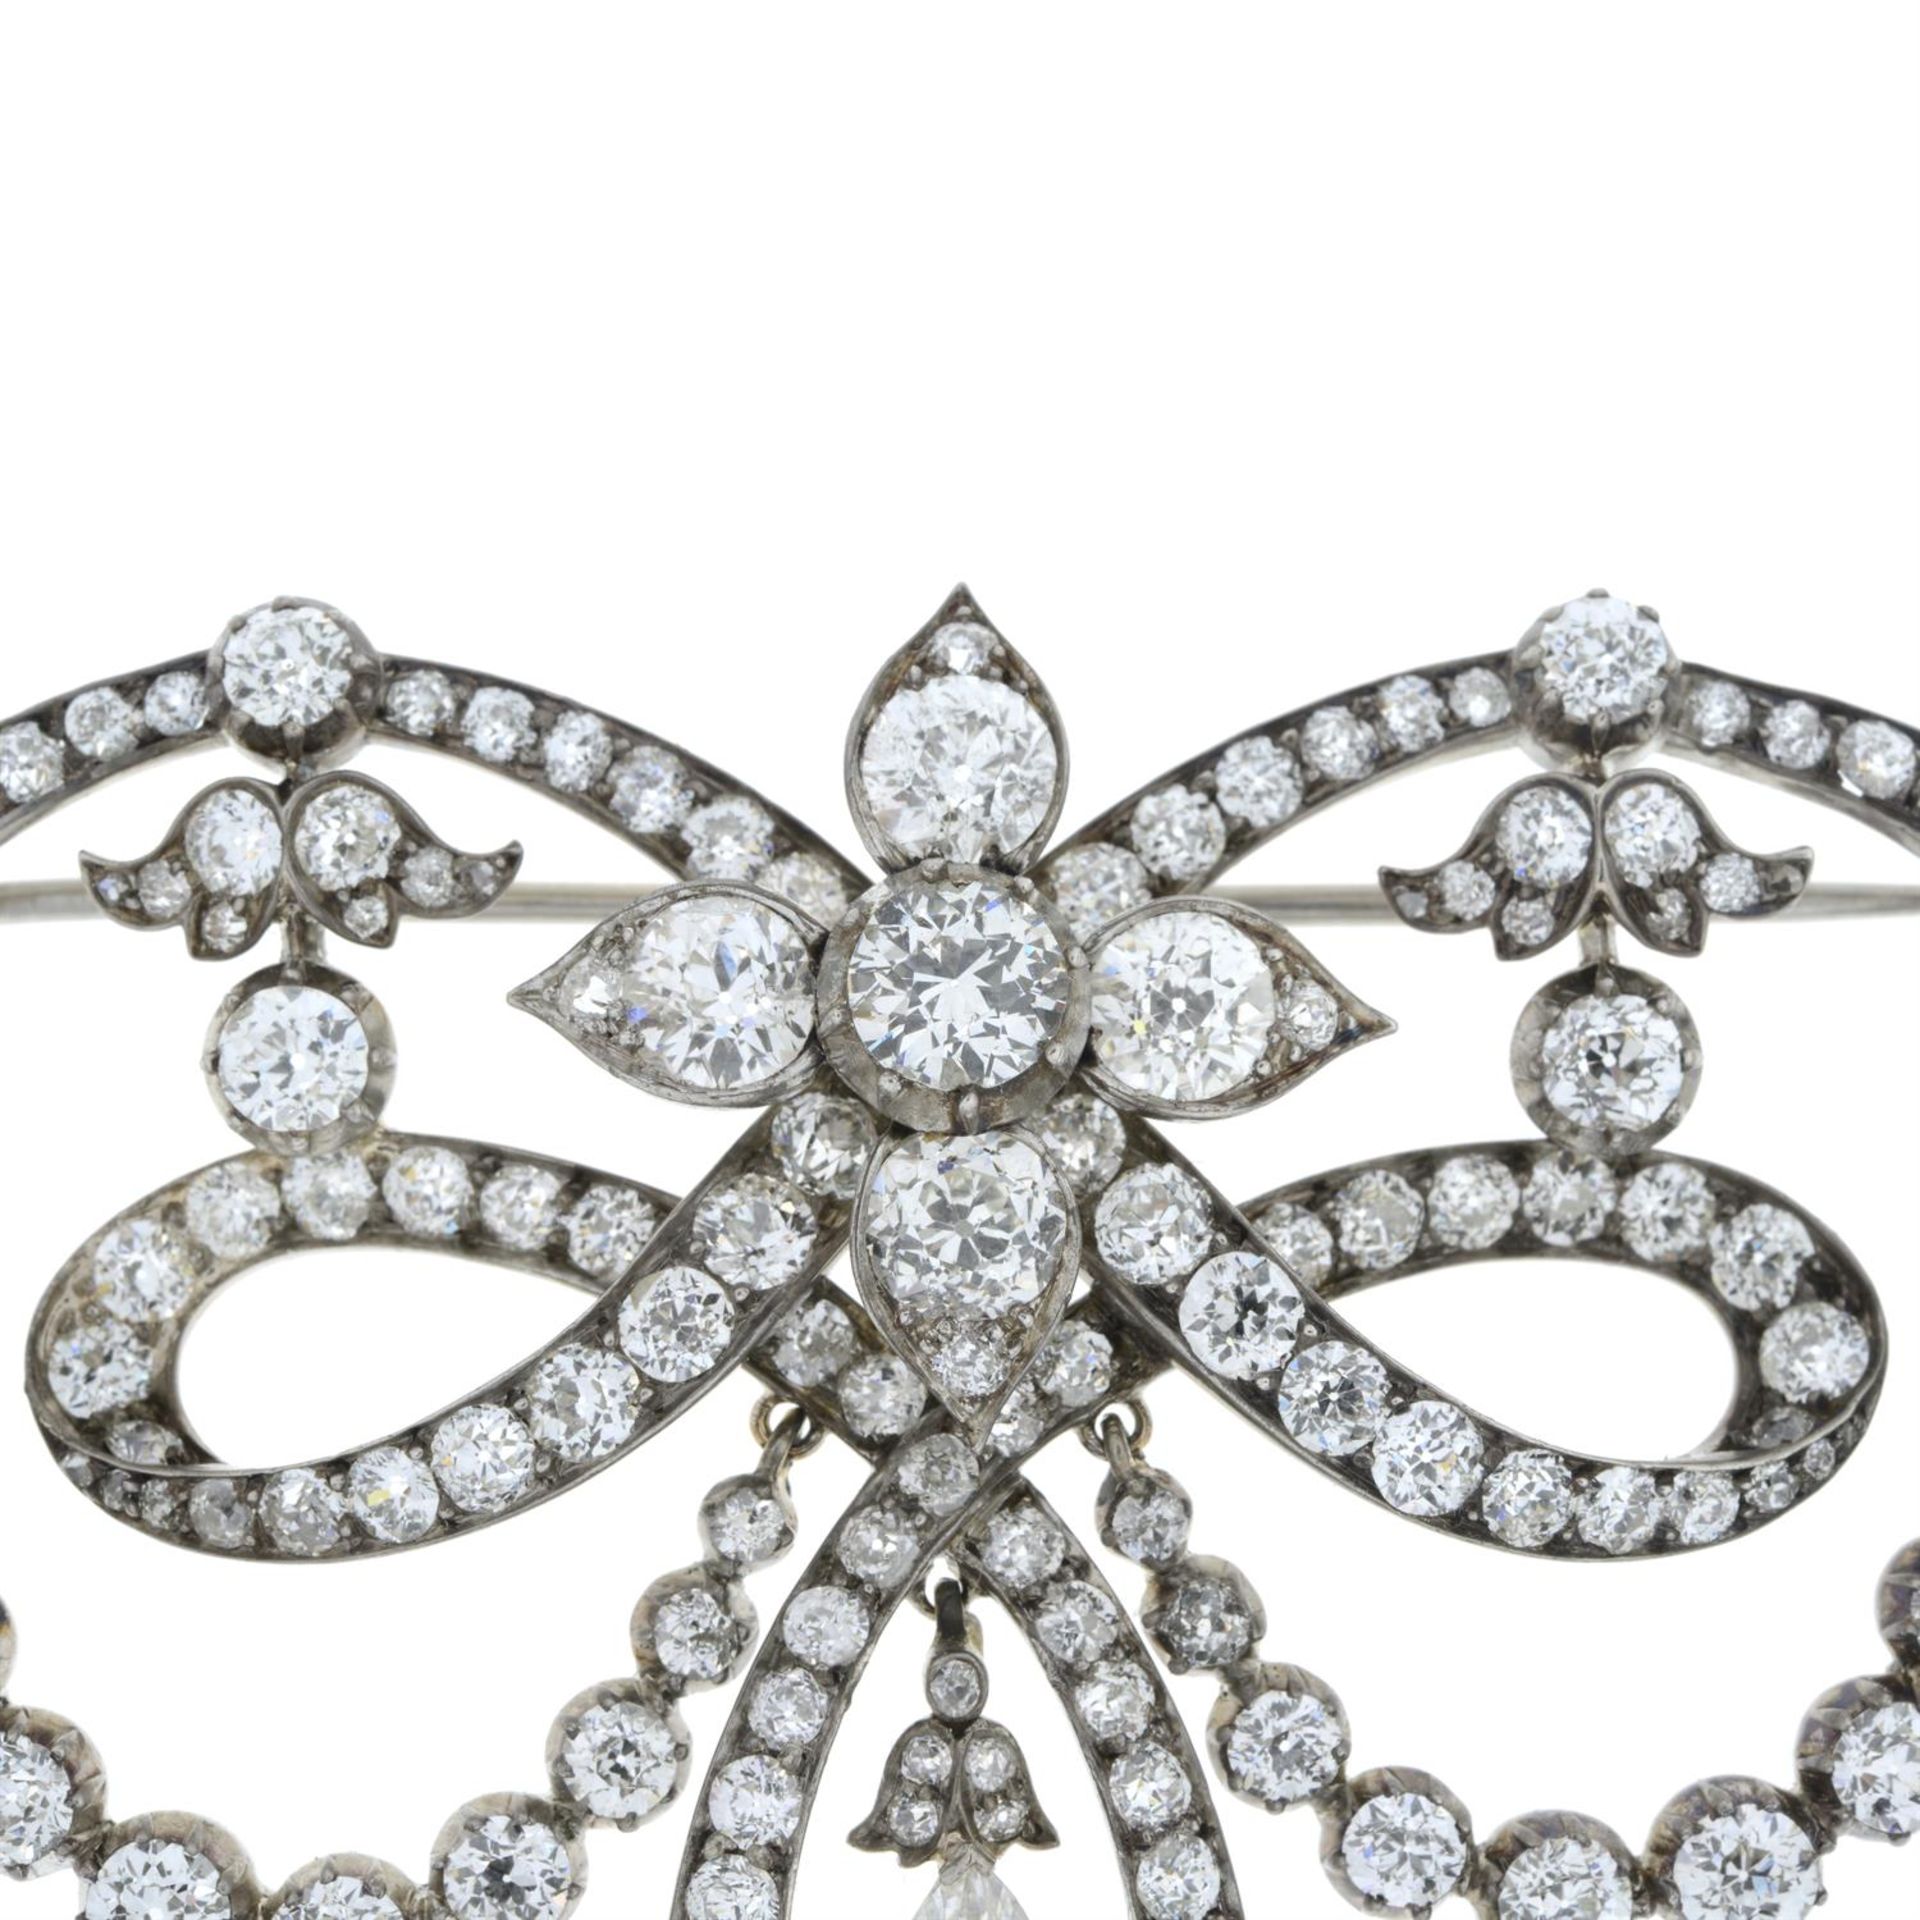 19th century silver and gold diamond brooch - Image 5 of 7